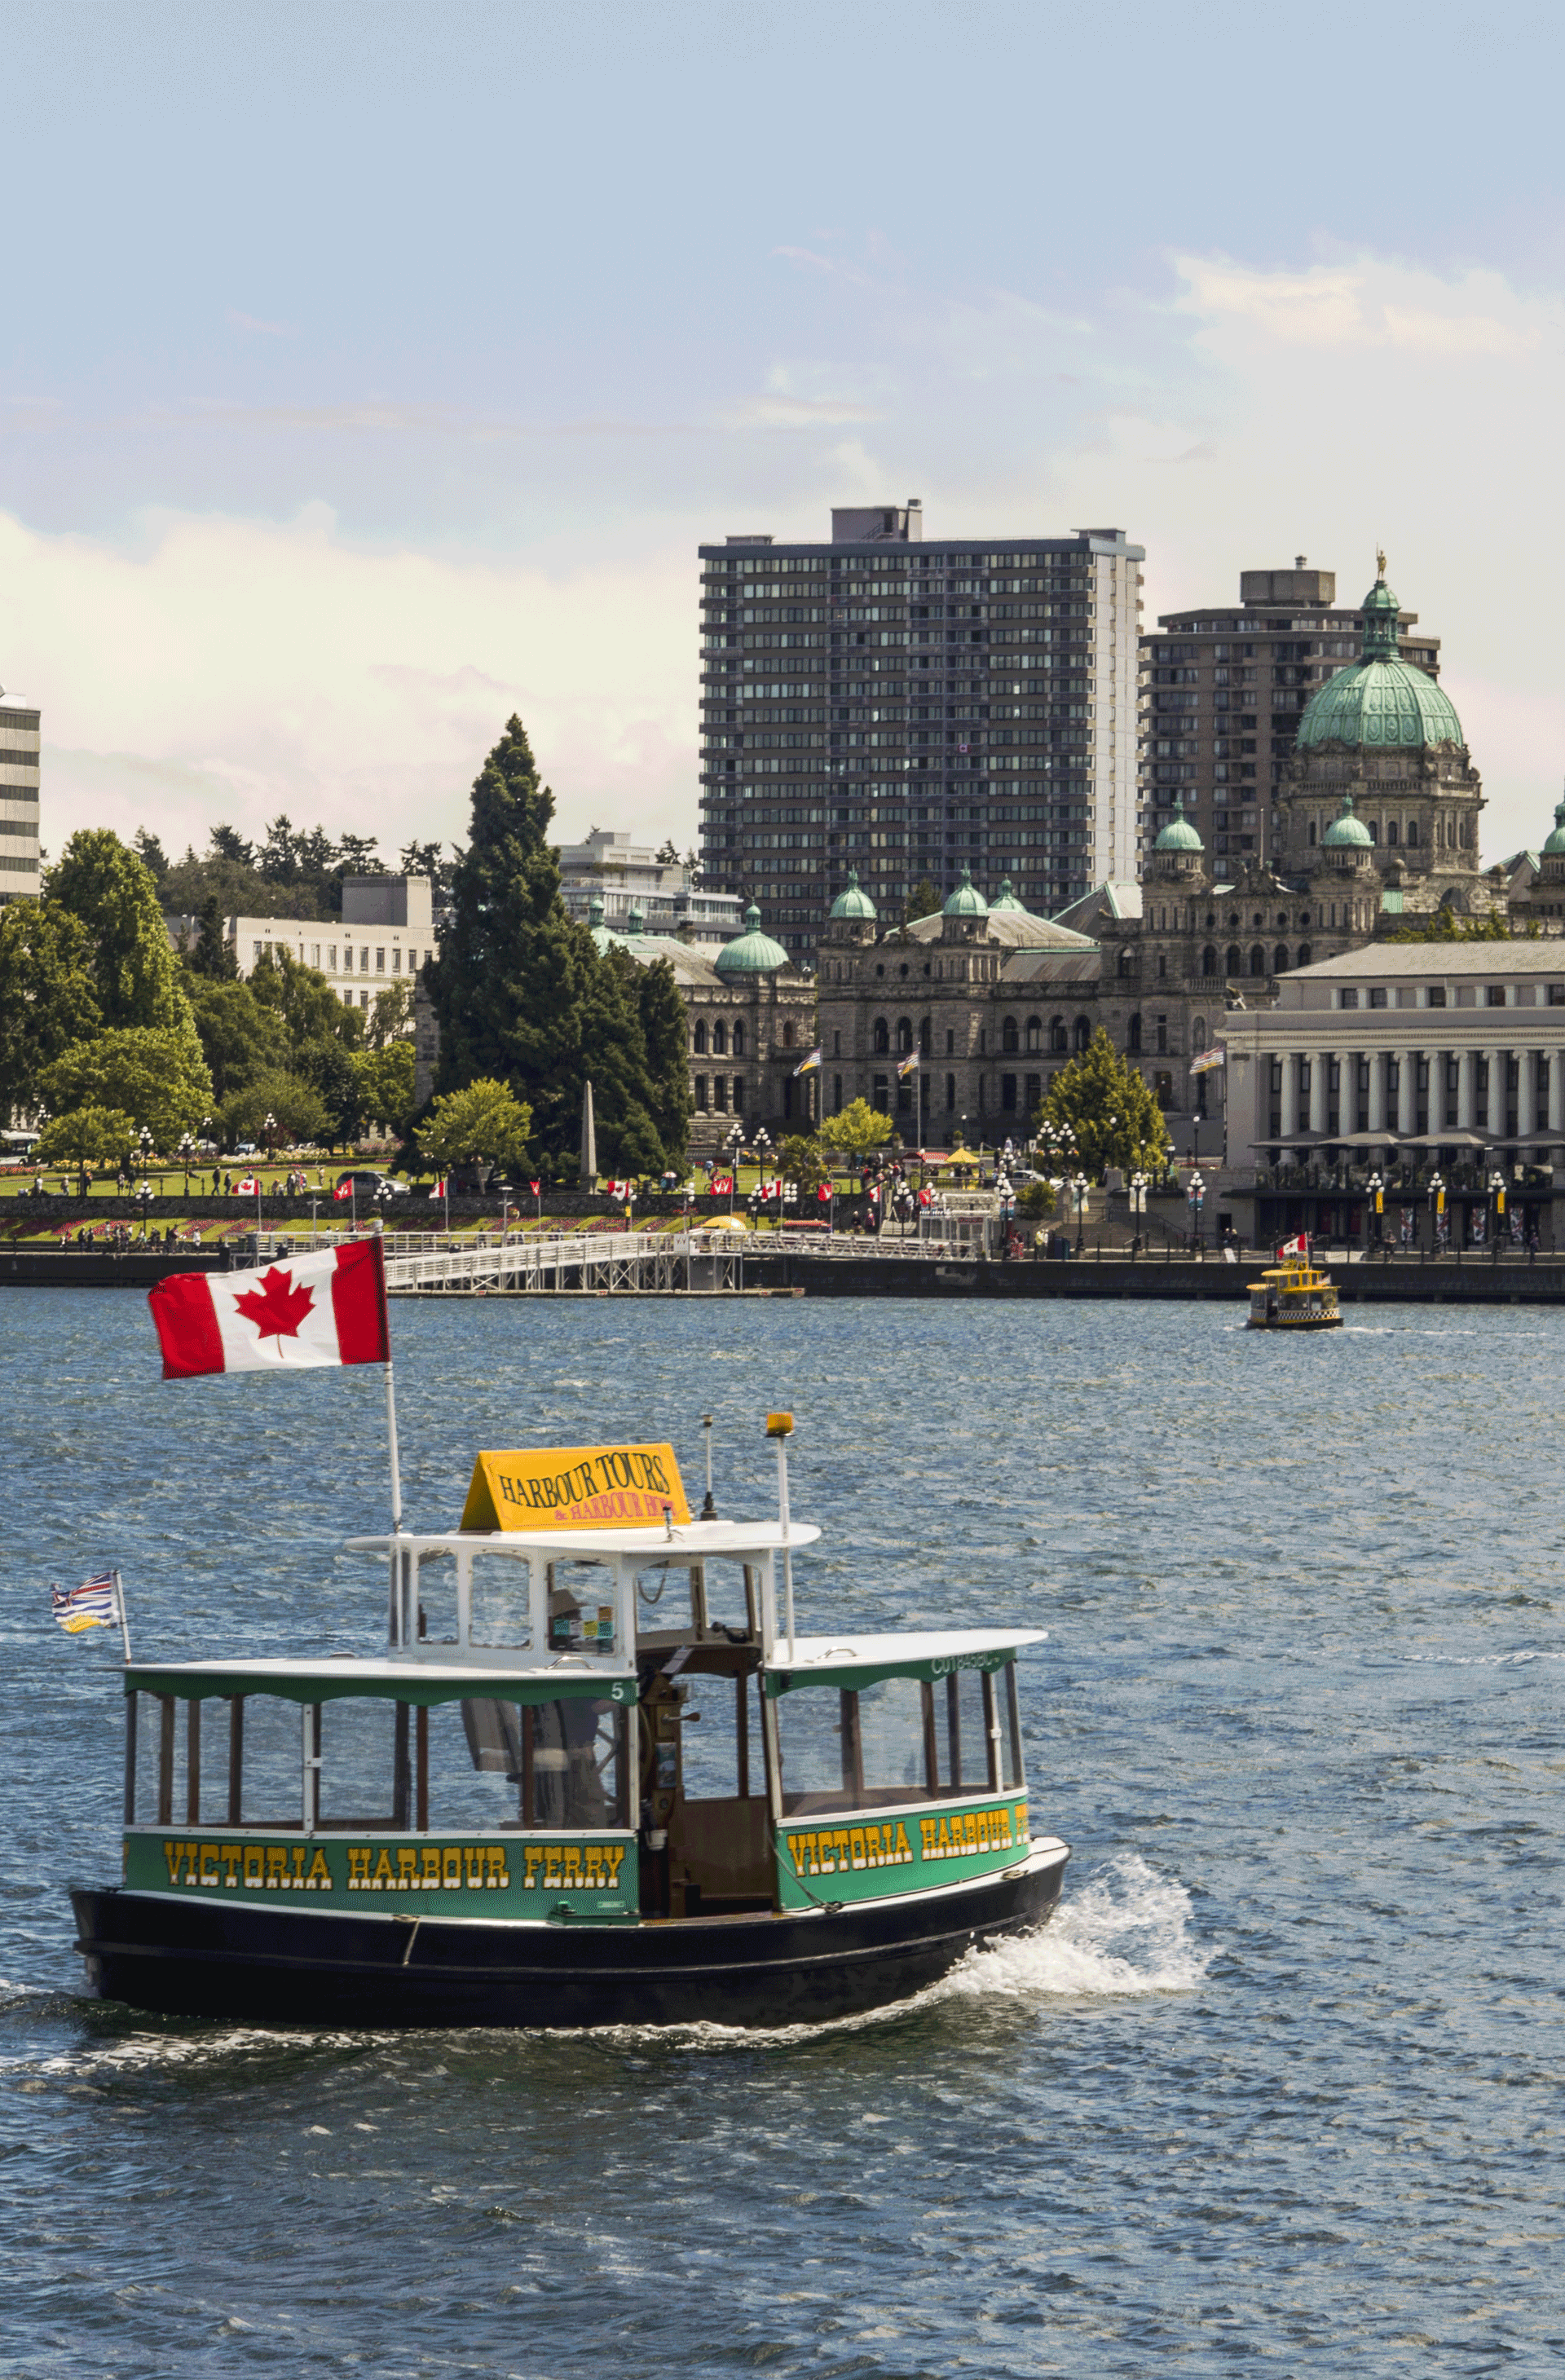 The revolution of sustainable tourism in Greater Victoria, British Columbia.